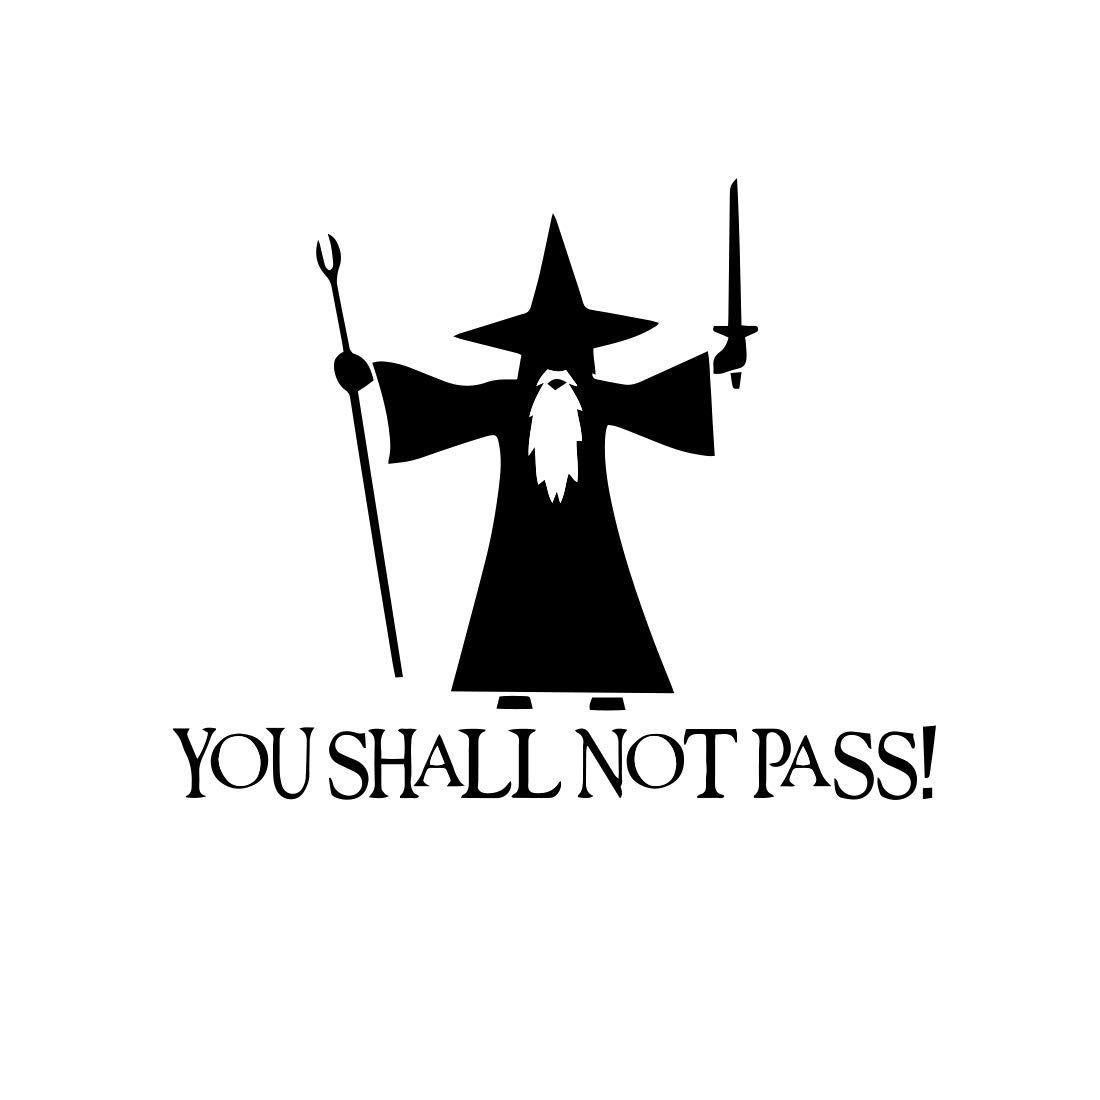 Lotr Logo - Bargain Max Decals - You Shall Not Pass! - Gandalf LOTR Sticker Decal  Notebook Car Laptop 6